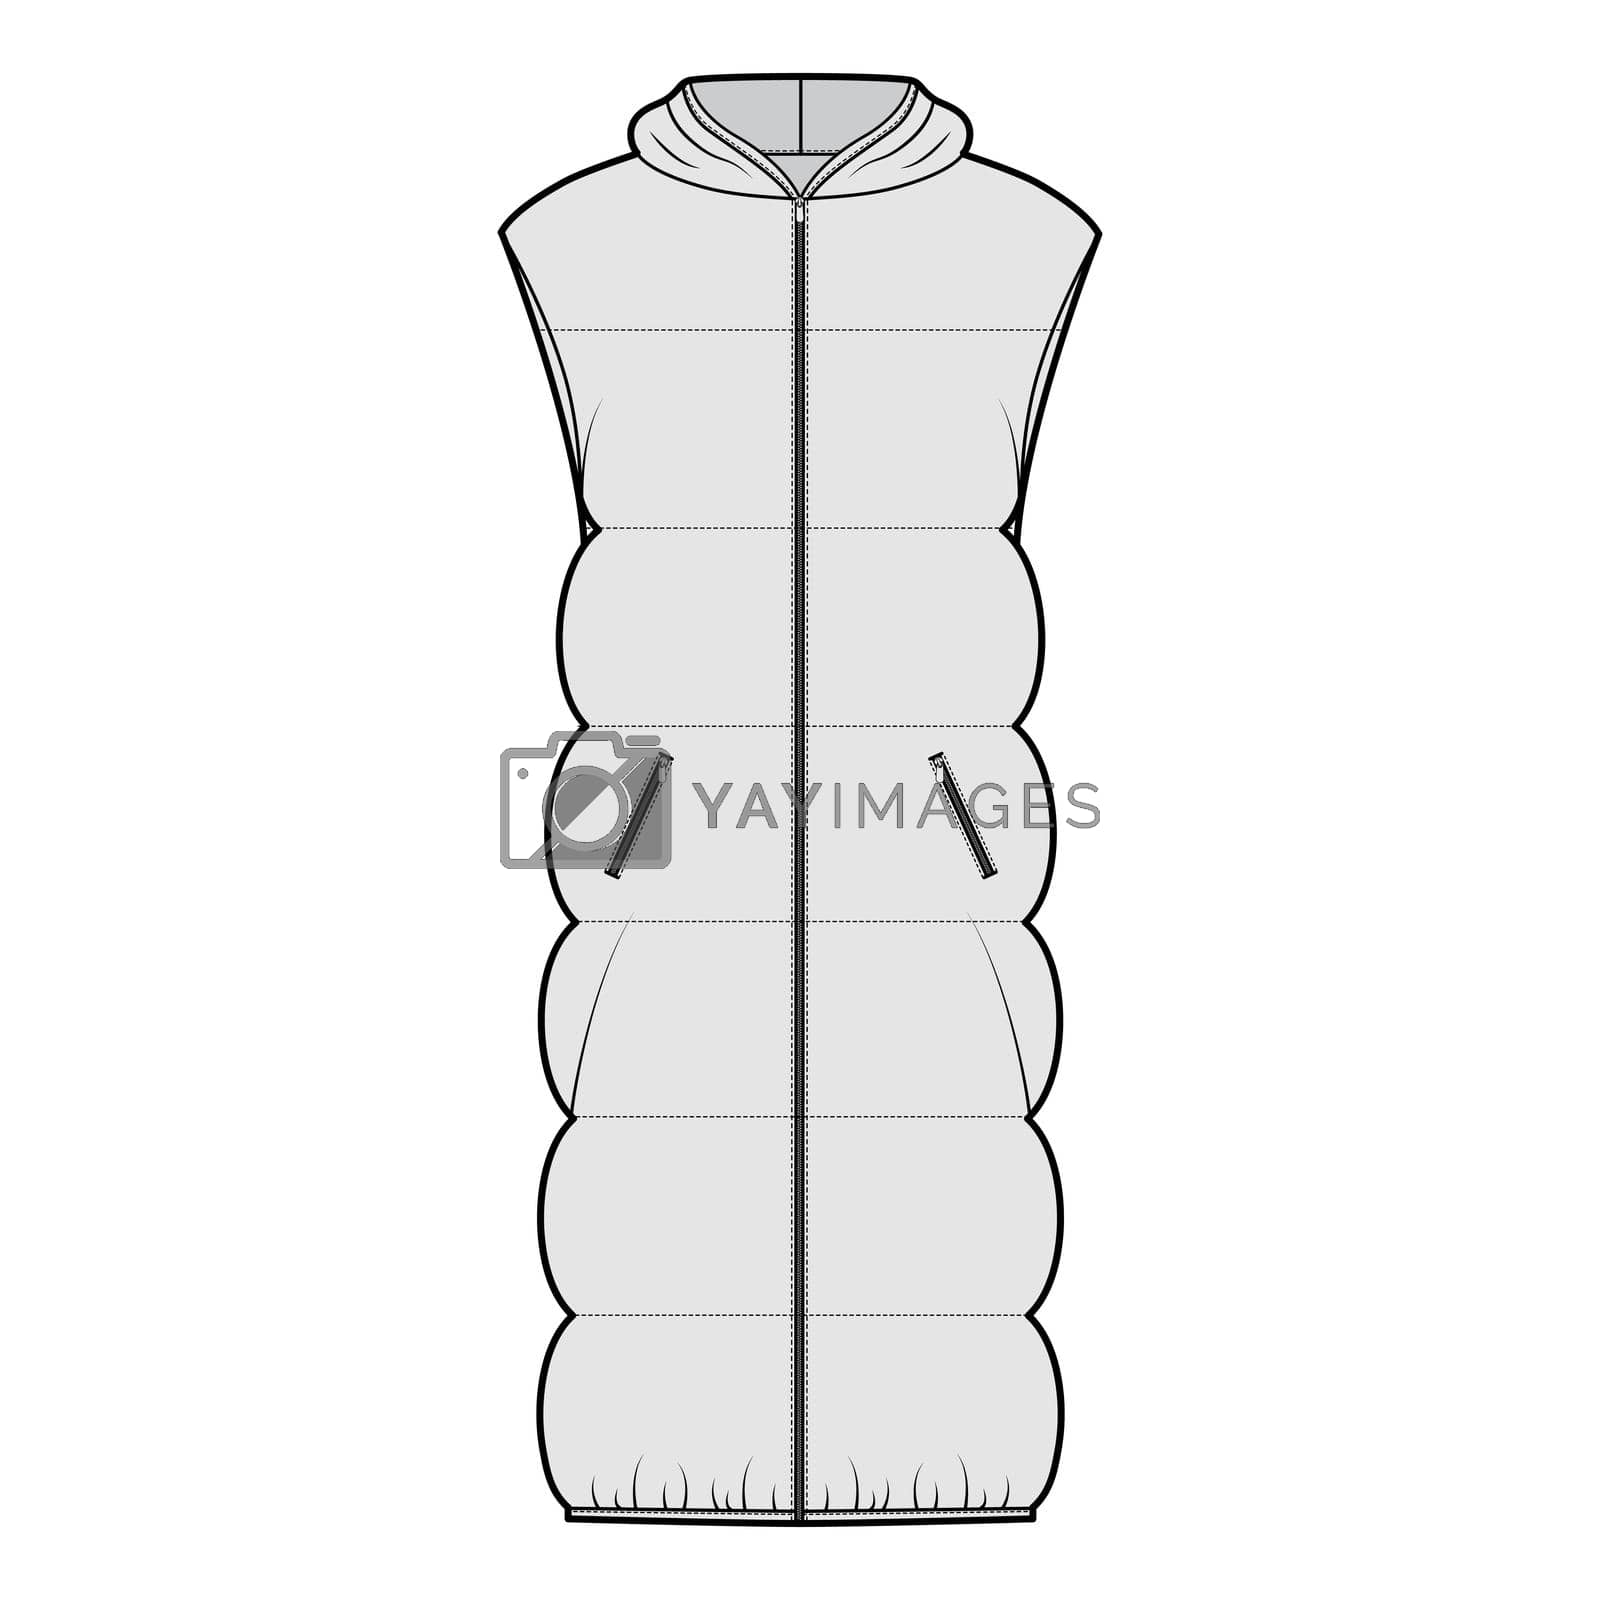 Royalty free image of Down vest puffer waistcoat technical fashion illustration with sleeveless, hoody collar, zip-up closure, oversized by Vectoressa